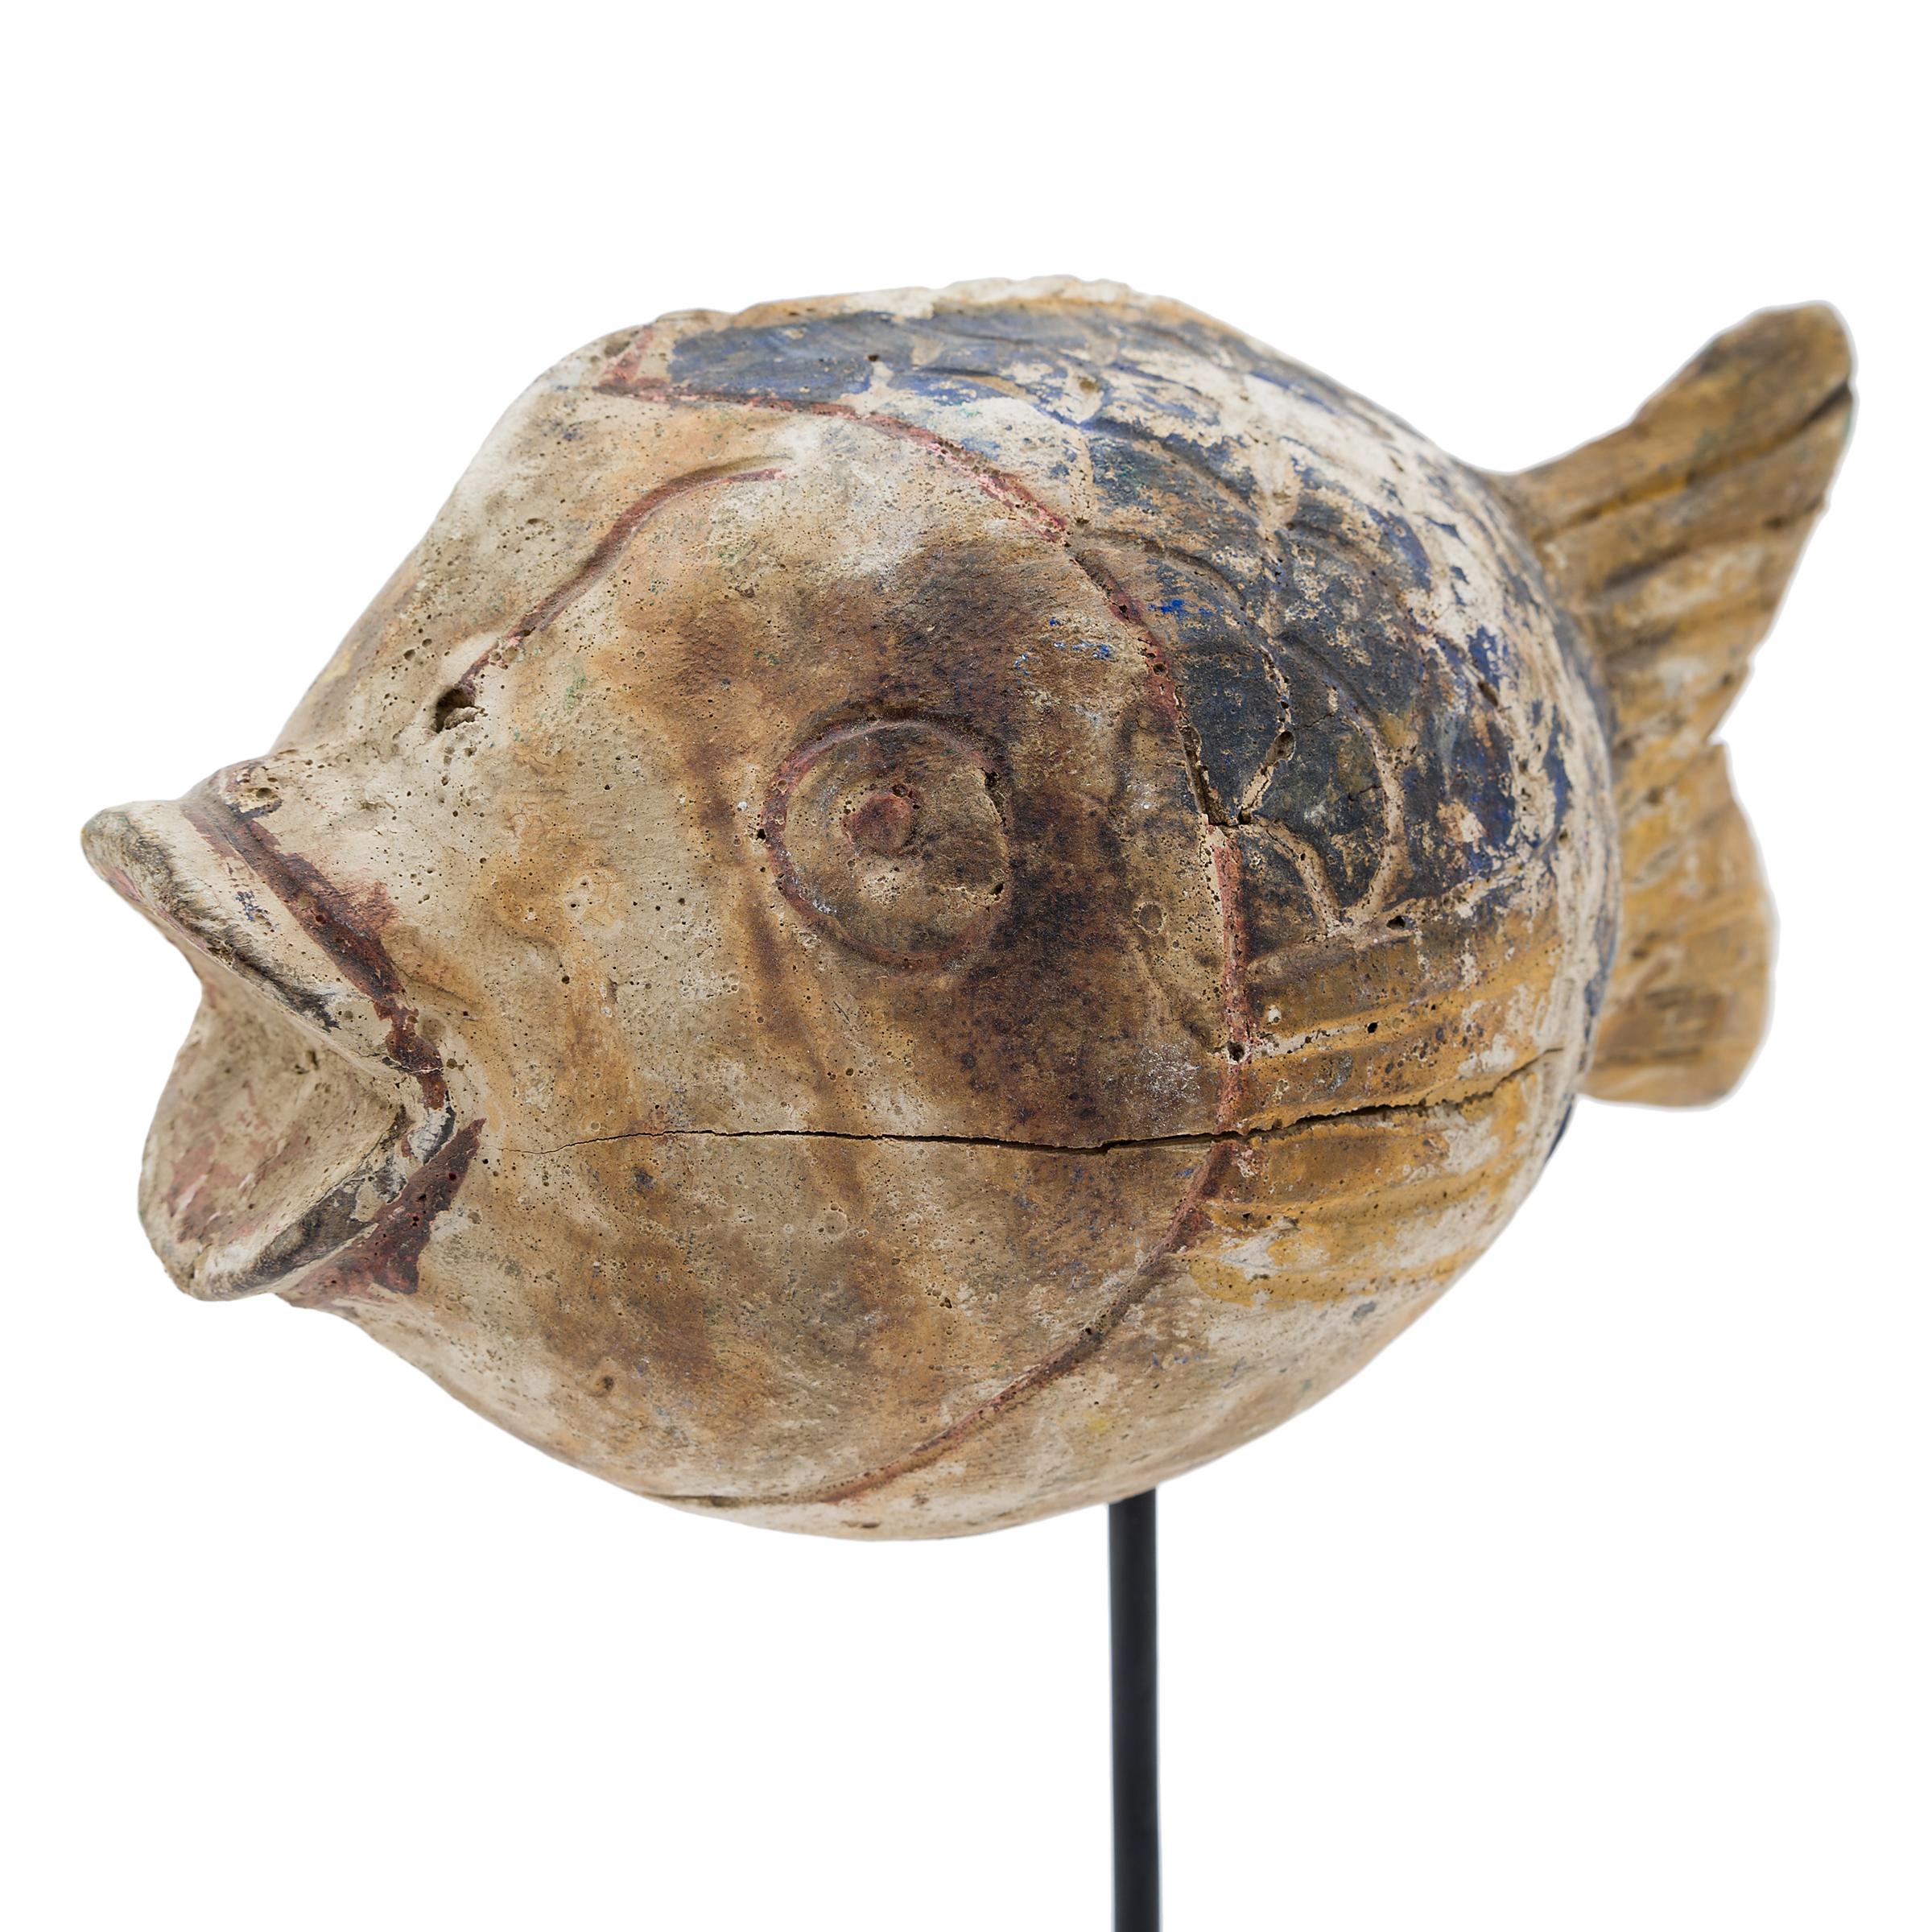 Hand-carved from reclaimed wood, this rustic koi sculpture recreates early 20th-century Chinese folk art designs. The fish is carved with a squat, rounded body and finished with blue and yellow pigments. Common motifs in Chinese art, fish are